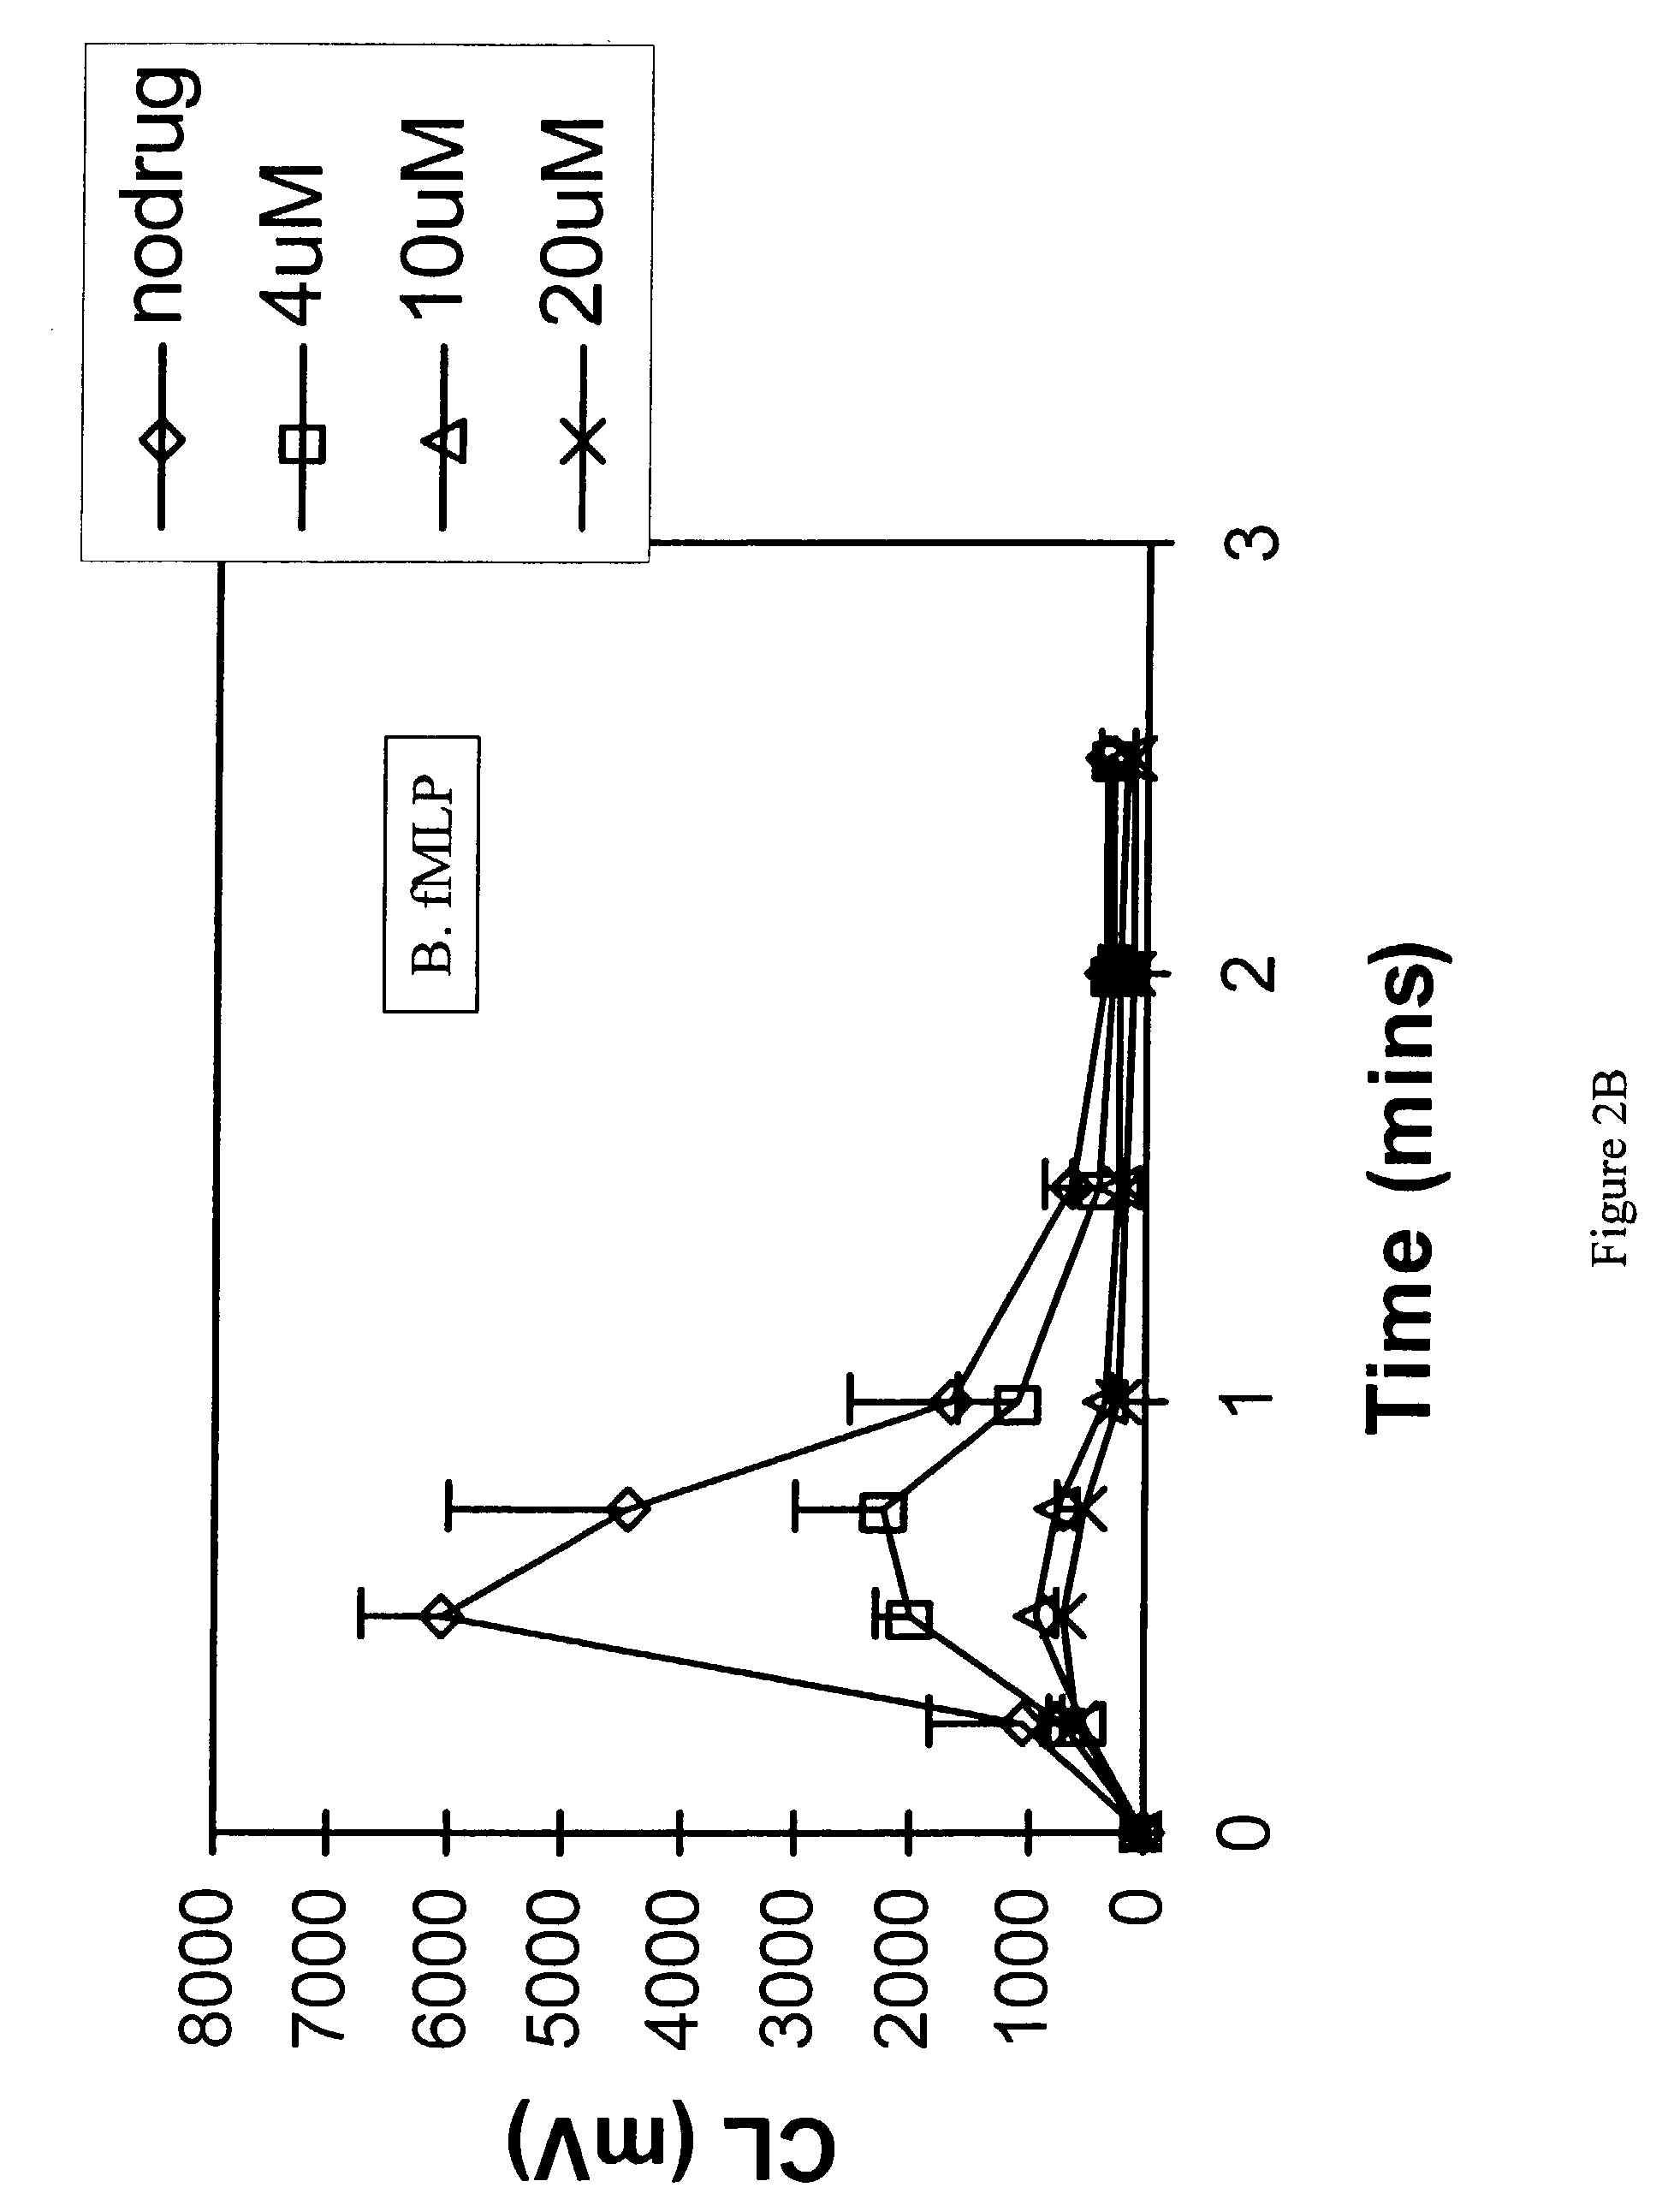 Compositions and methods for the treatment of inflammatory diseases using topoisomerase inhibitors